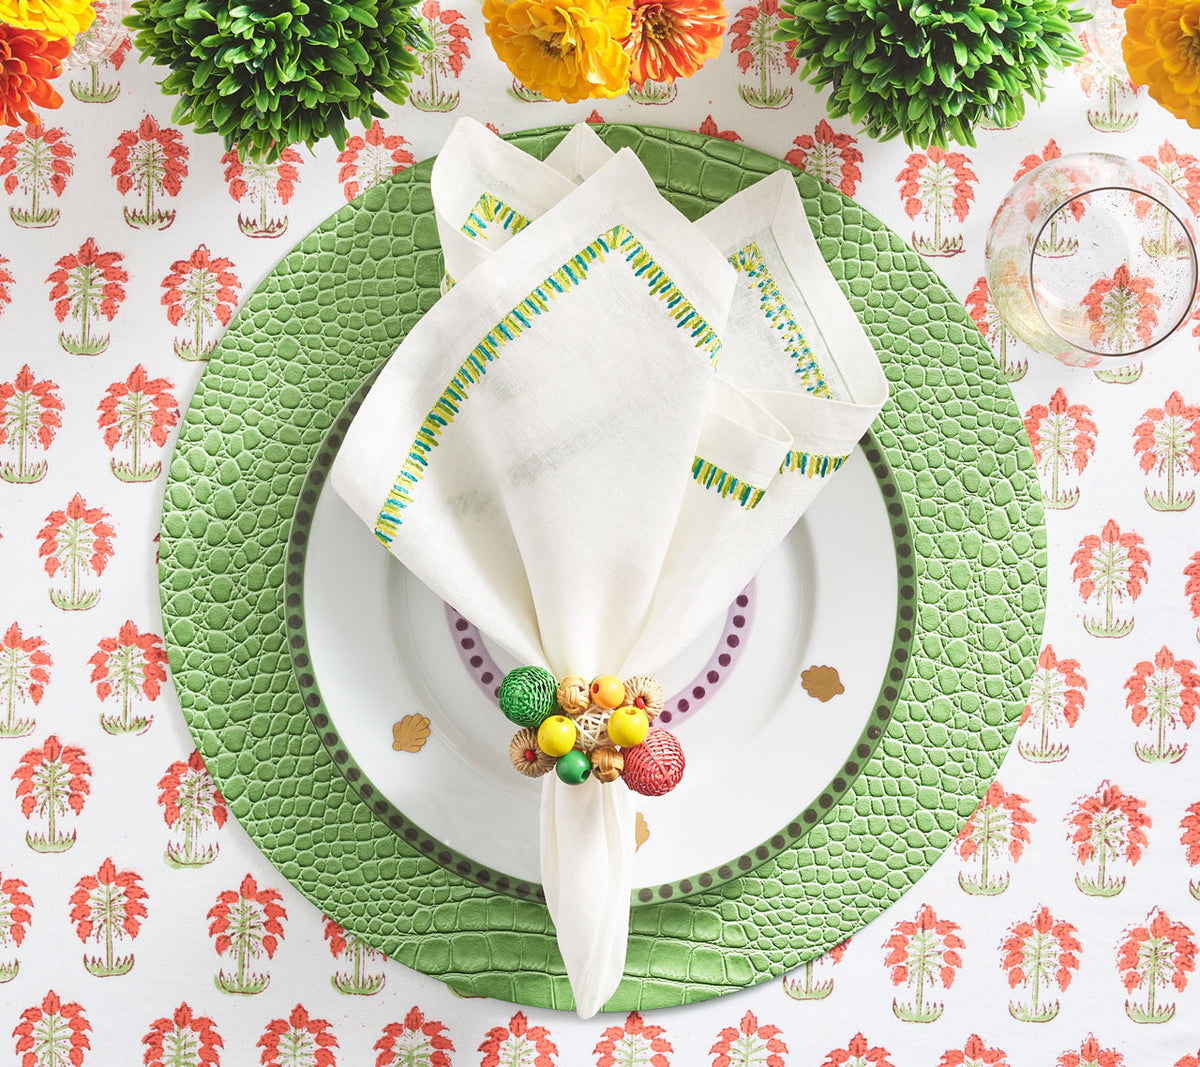 Round, green Croco Placemat  beneath a white napkin with green border on top of a white tablecloth with orange motifs